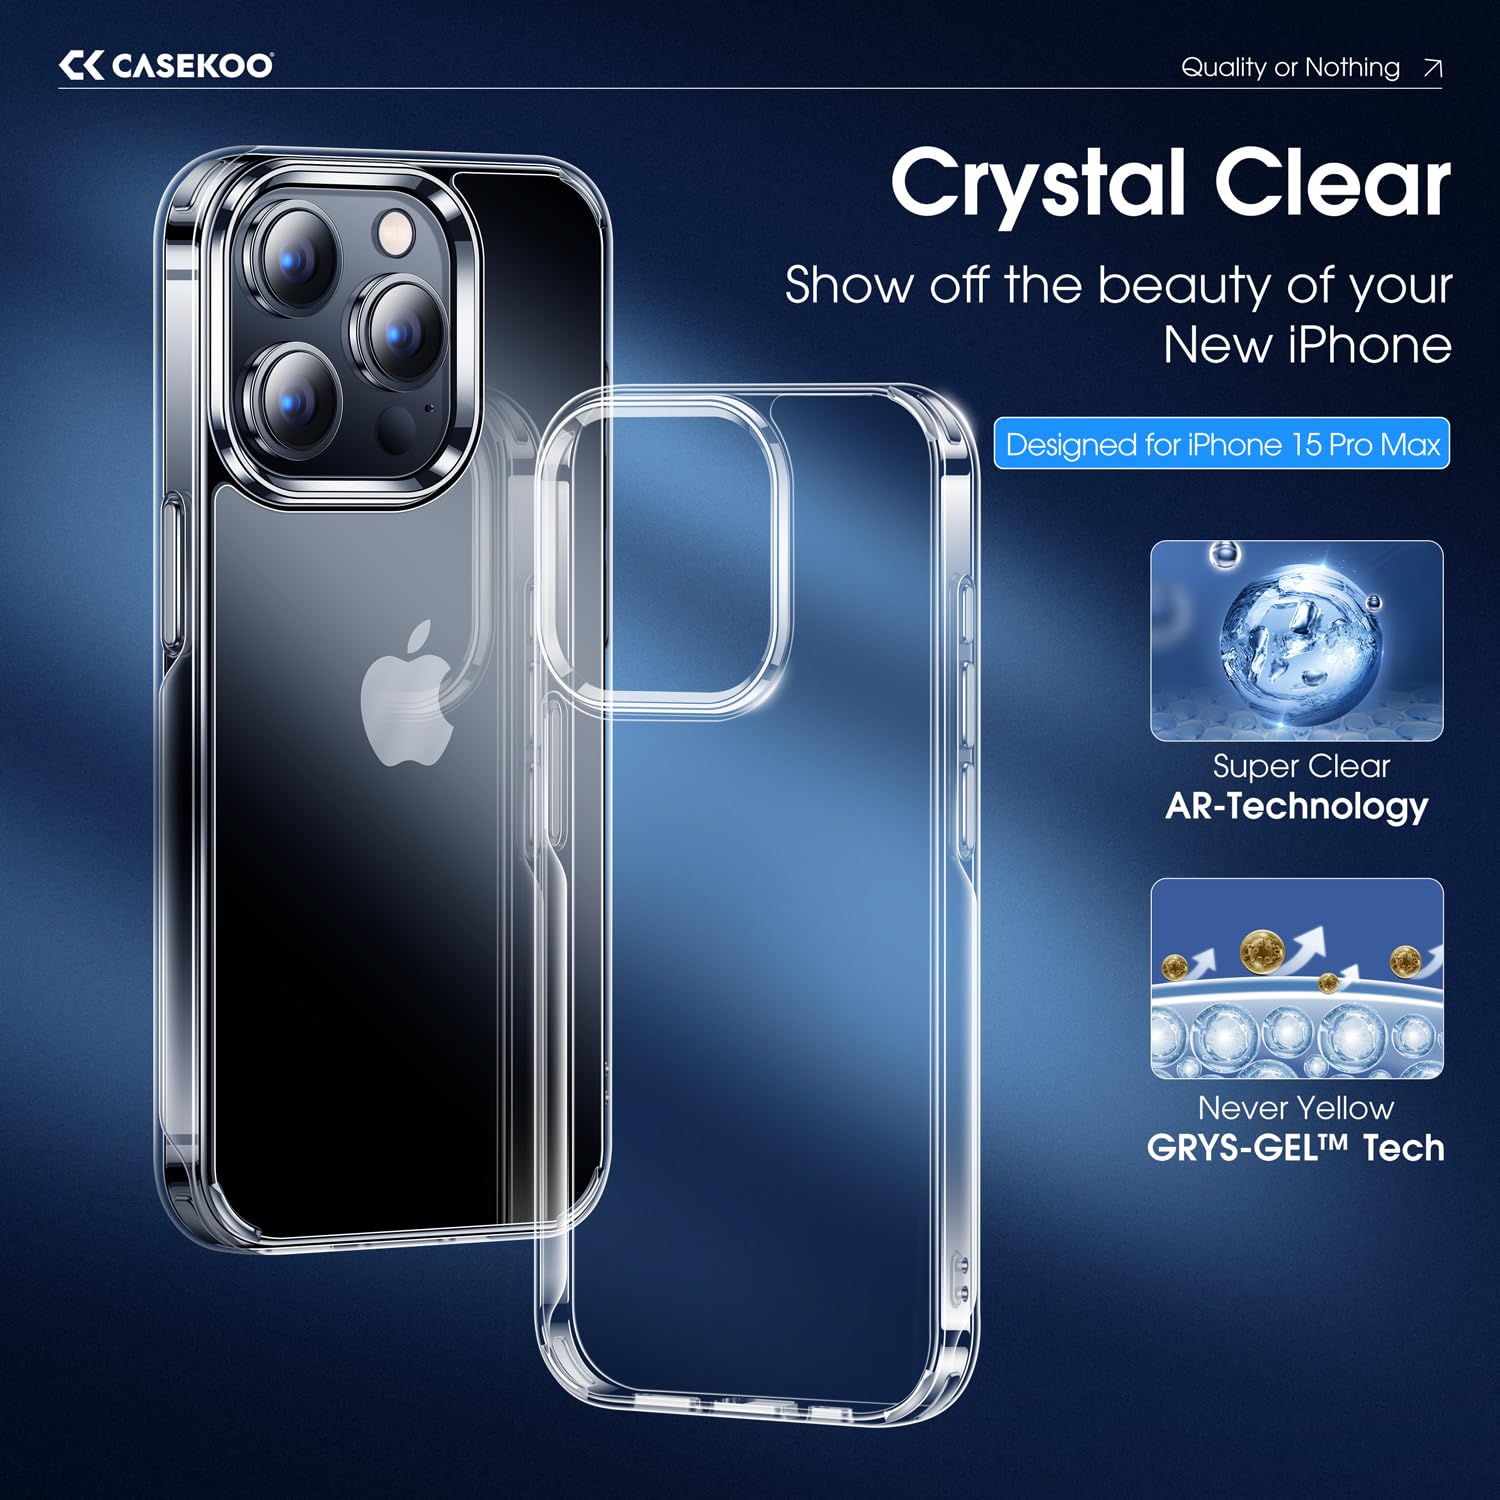 Buy CASEKOO for iPhone 15 Pro Max Case Crystal Clear, [Never